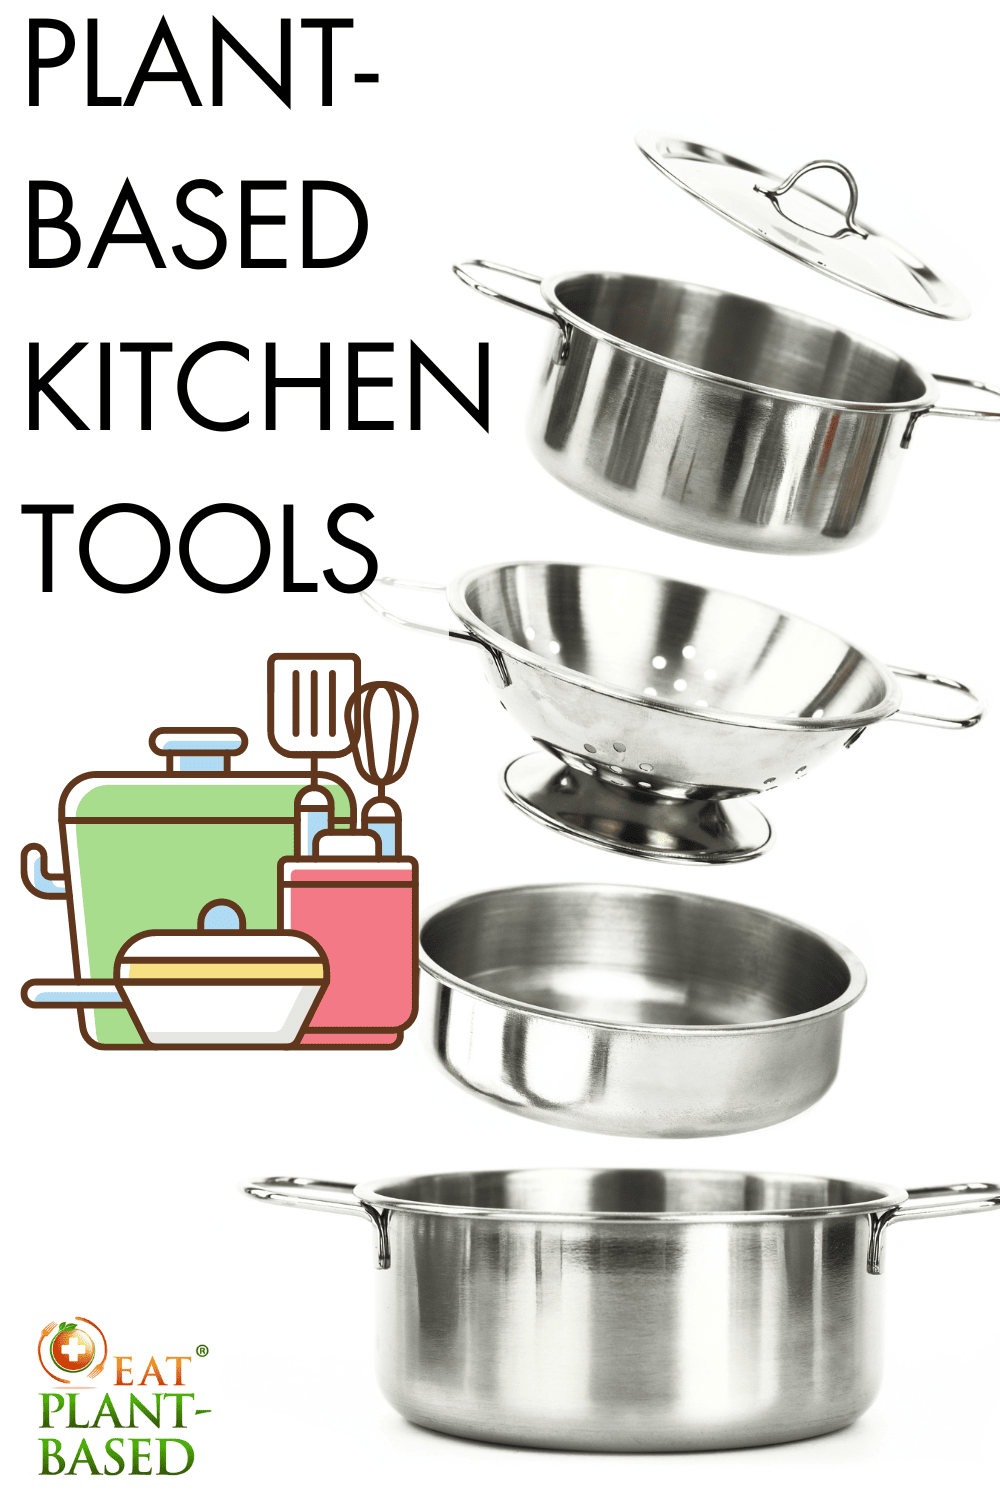 Essential Guide for Plant-Based Kitchen Tools - EatPlant-Based